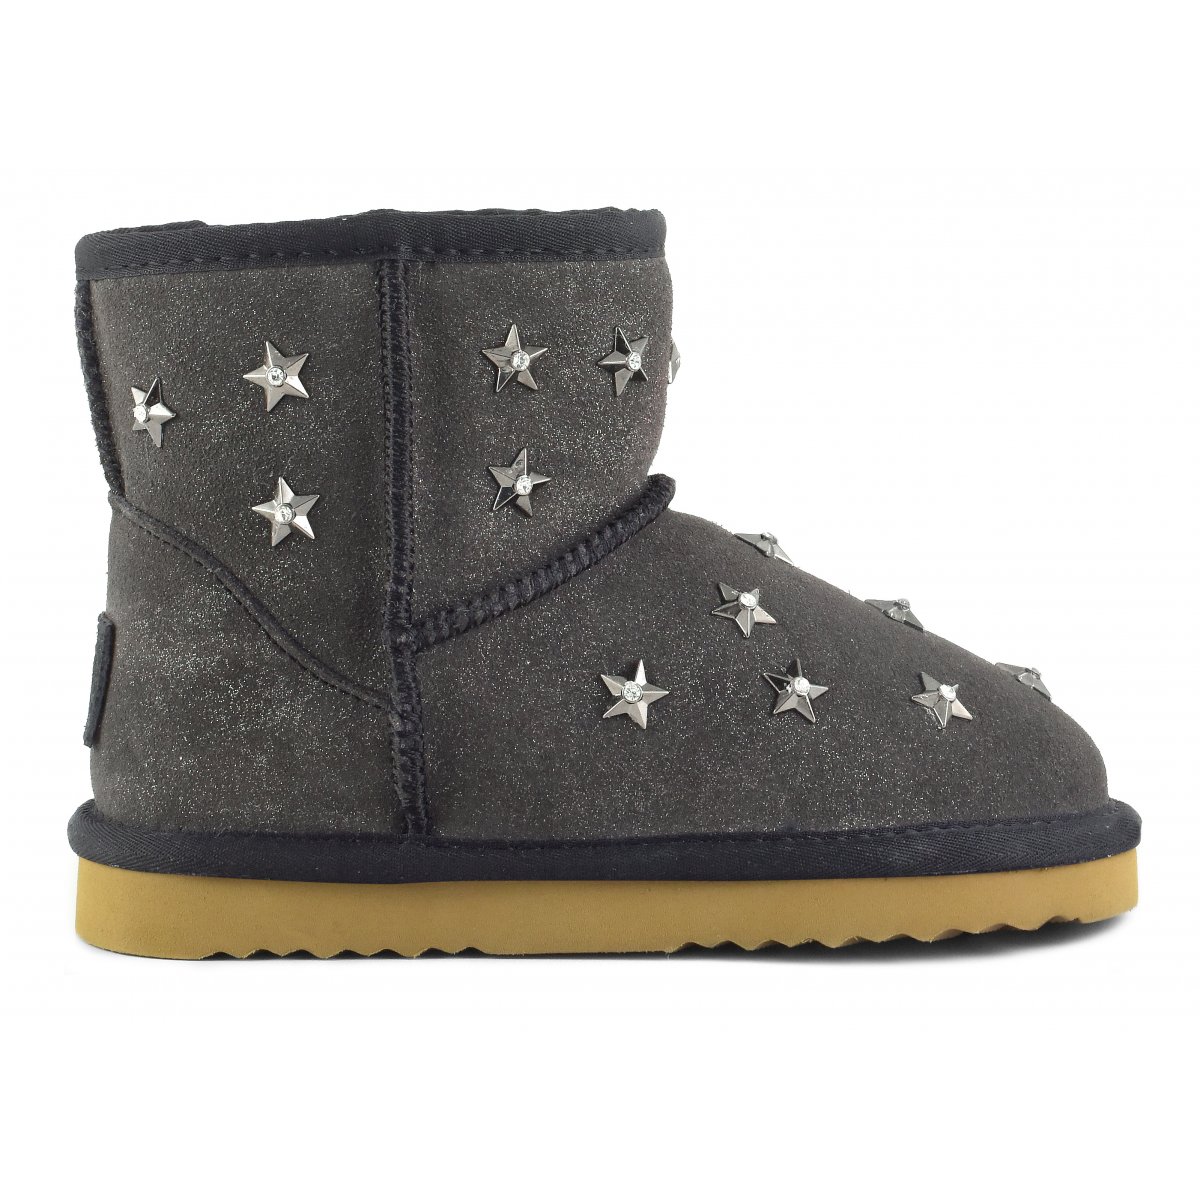 Leather ugg with star-studs - Kid Colors of California Children